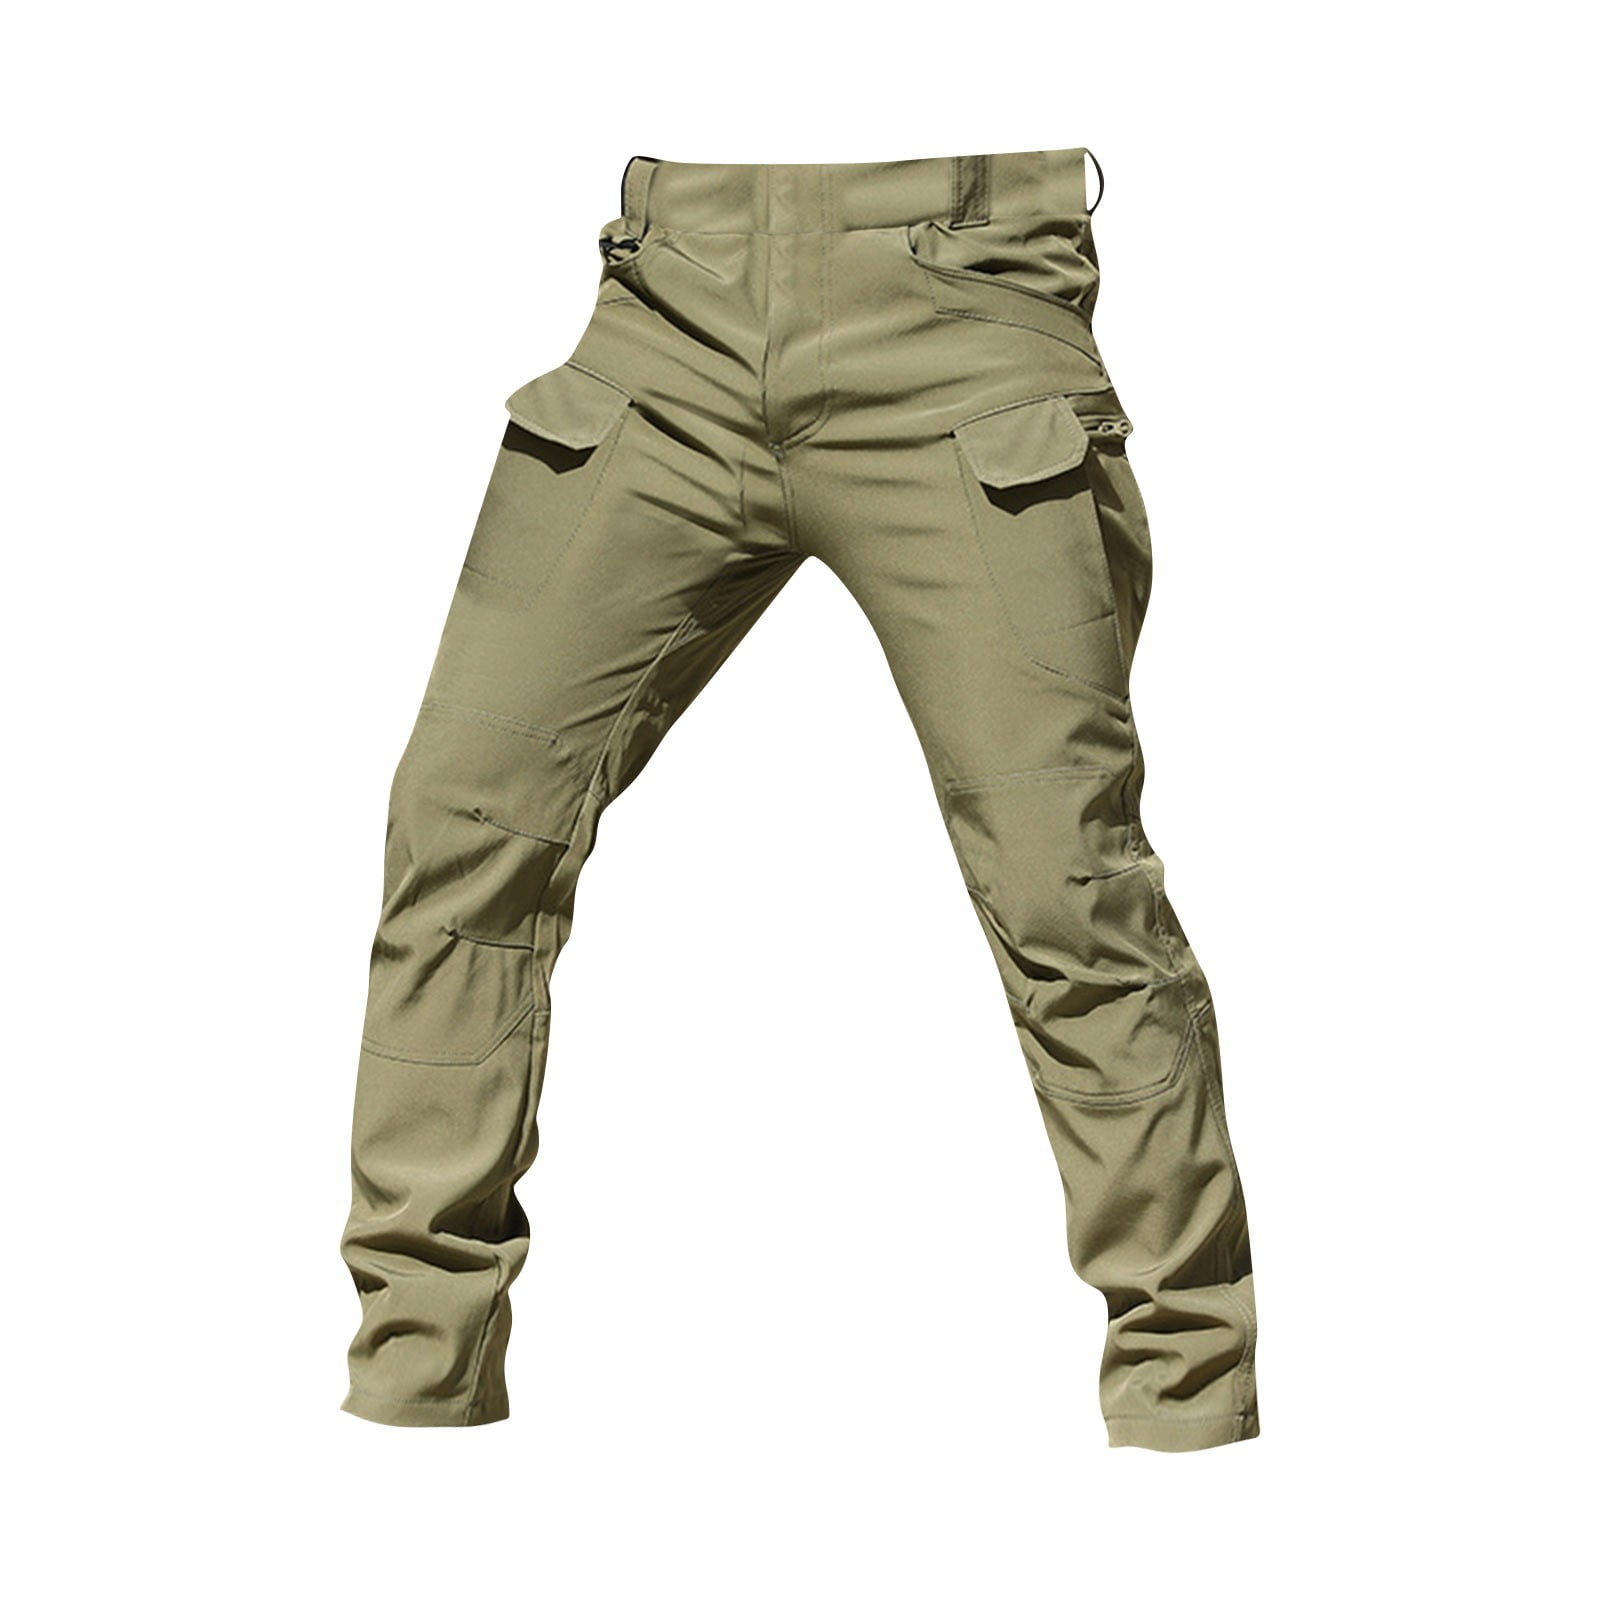 TQWQT Camo Cargo Pants for Men Relaxed Fit Cotton Casual Work